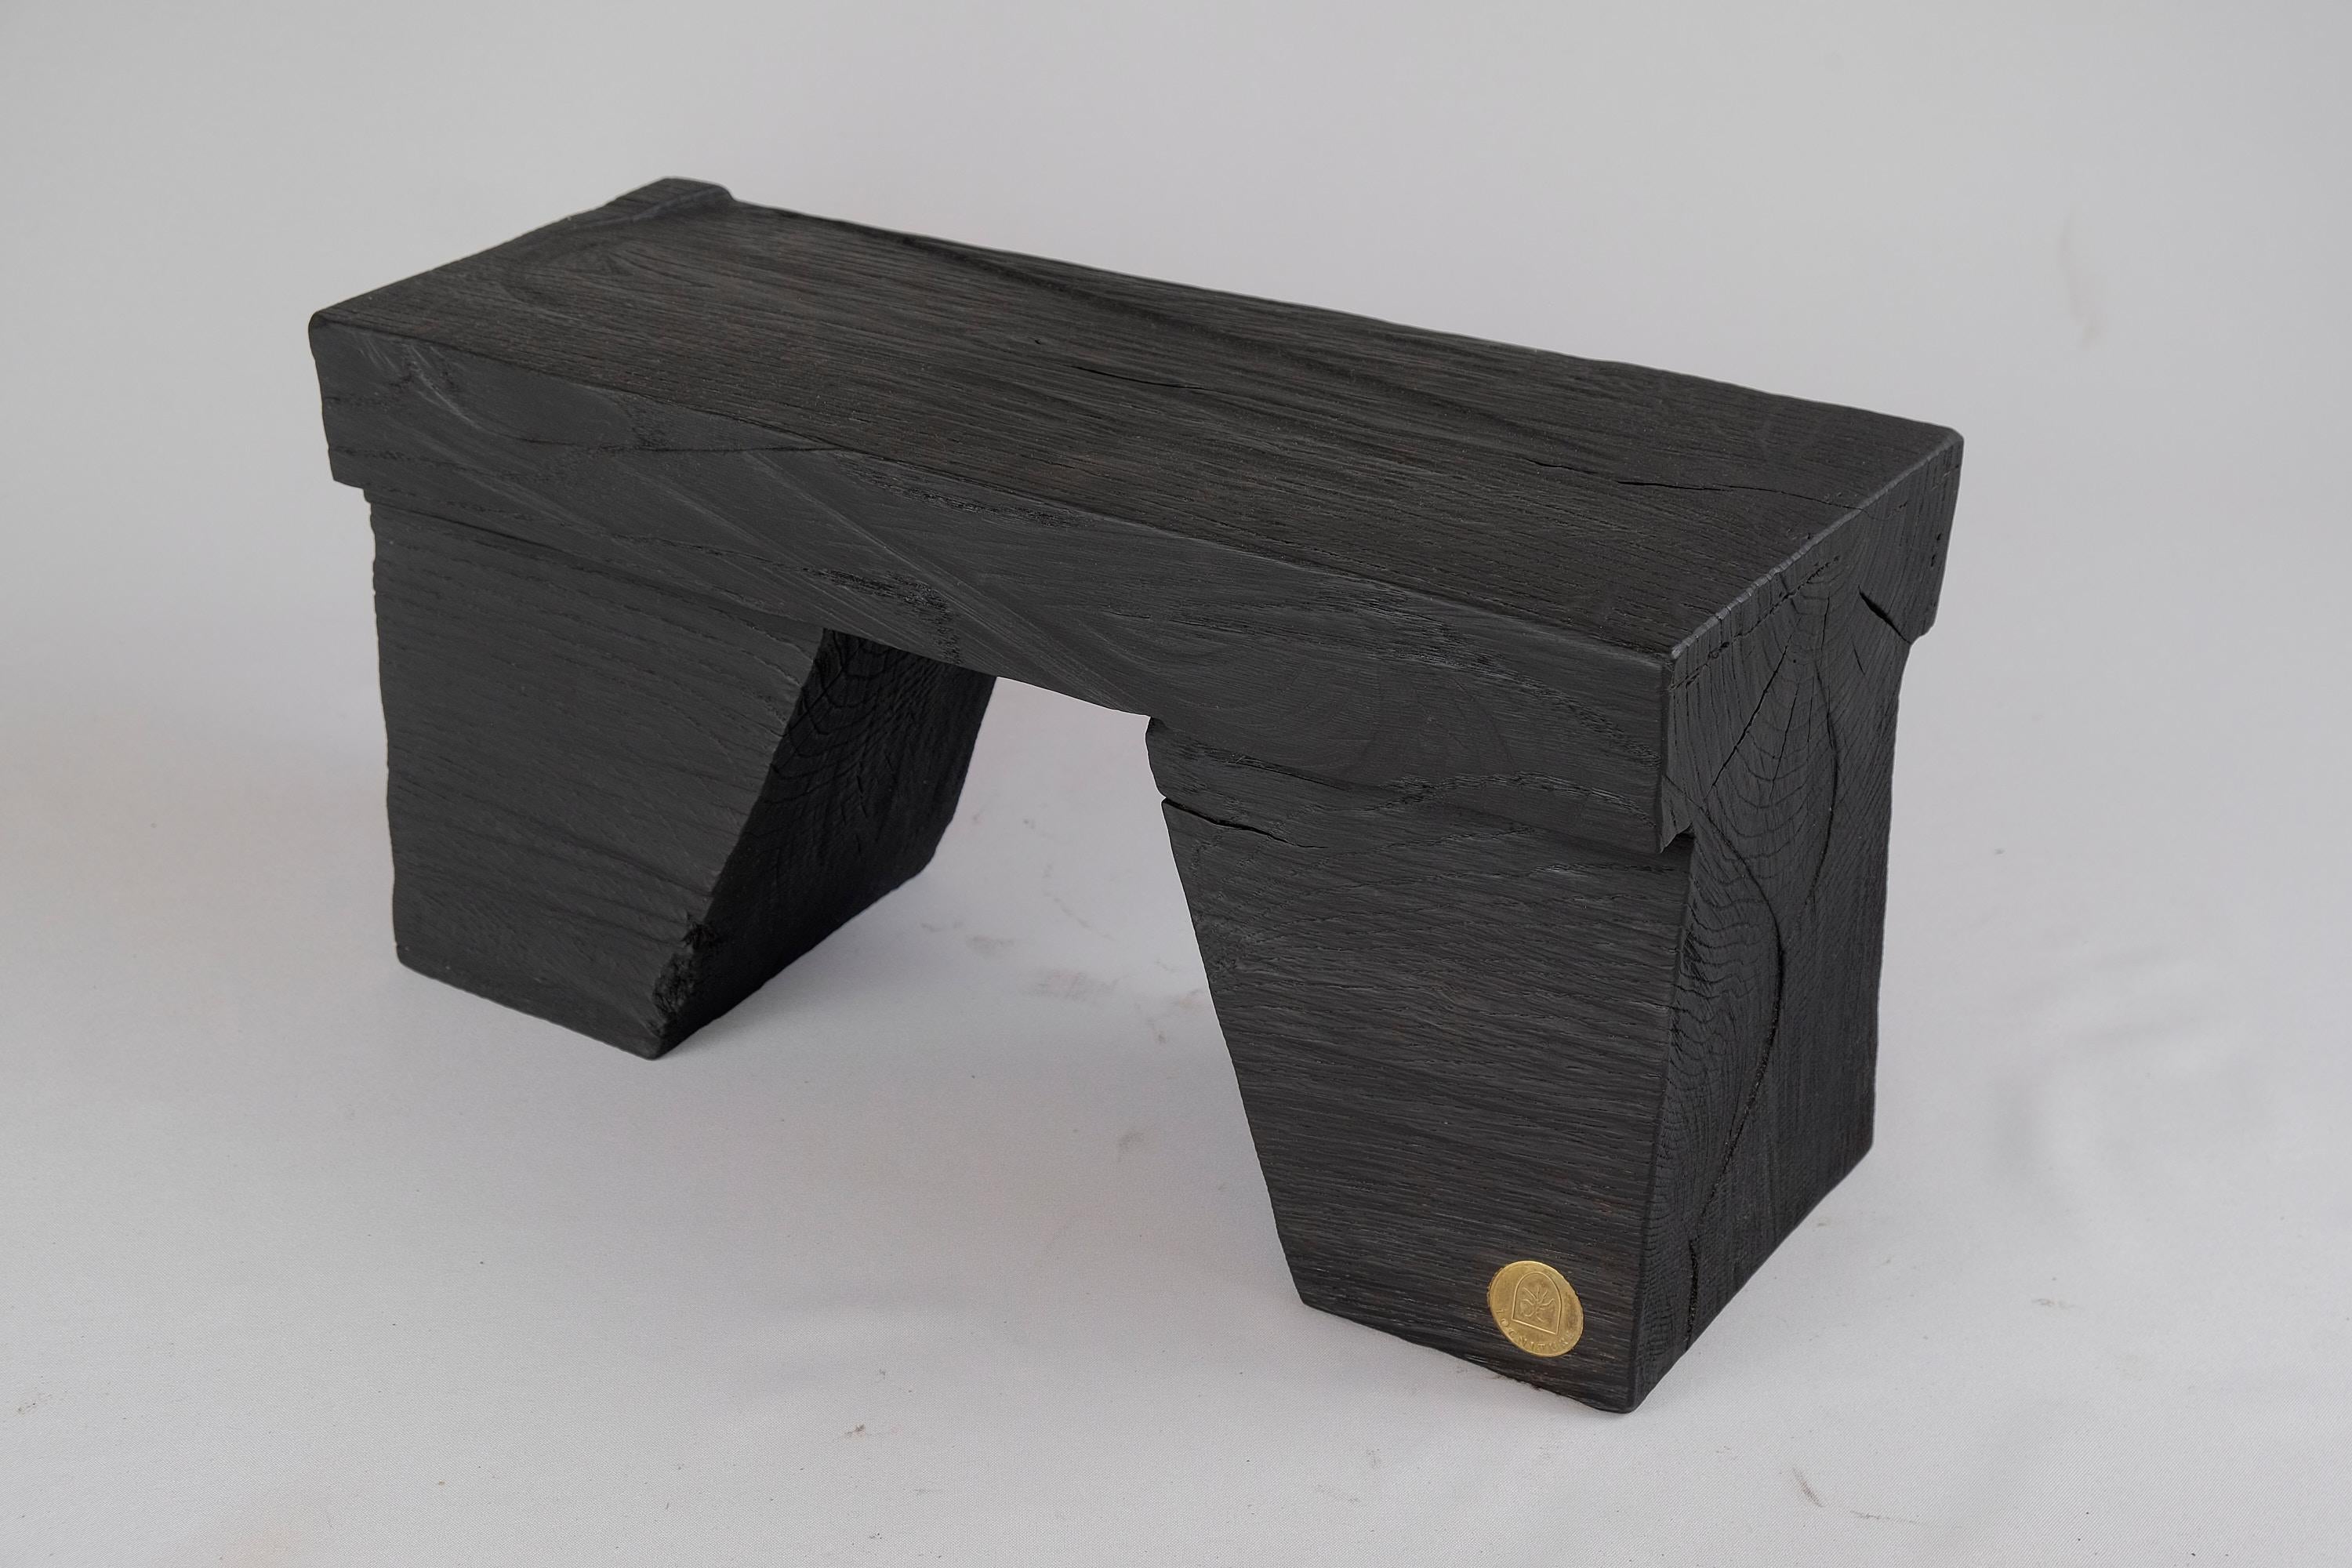 Carved Solid Burnt Wood, Side Table, Stool, Original Contemporary Design For Sale